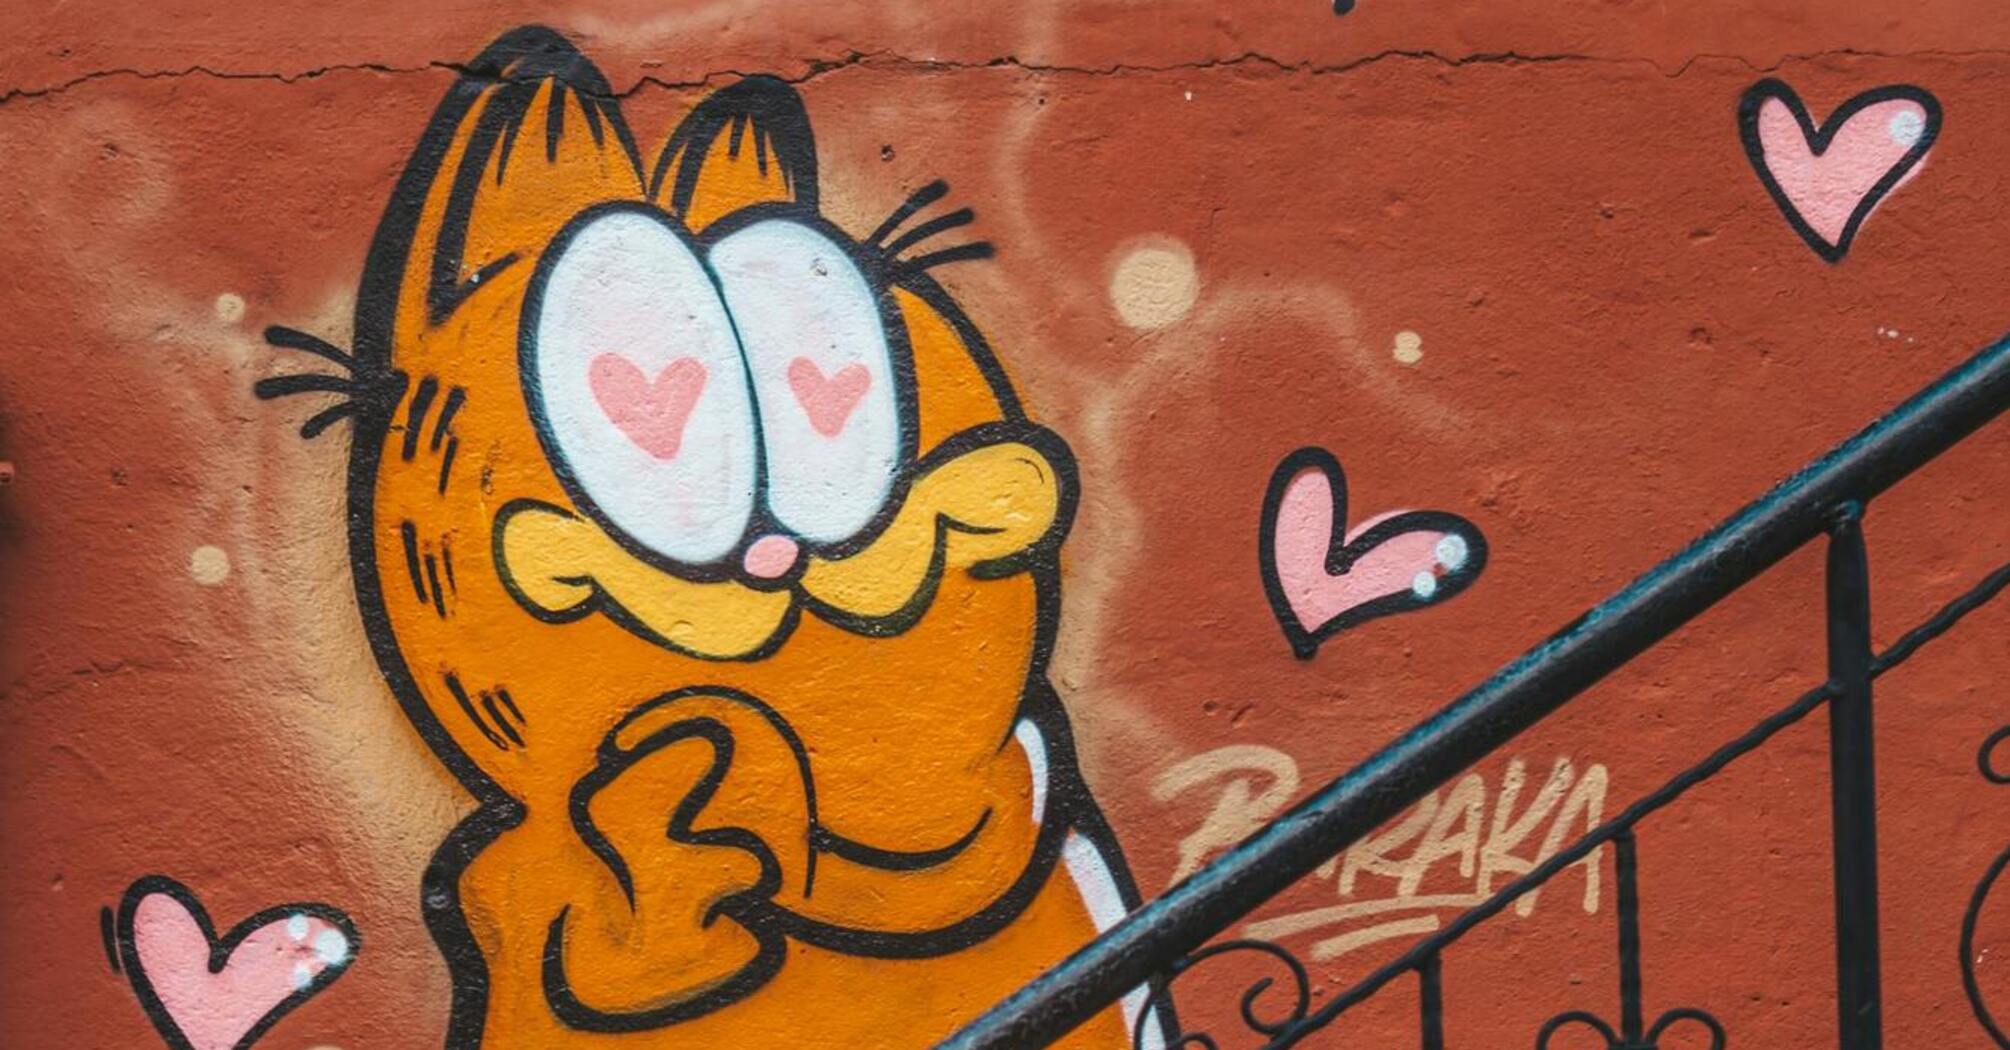 Graffiti of Garfield with heart eyes on a colorful wall near a staircase